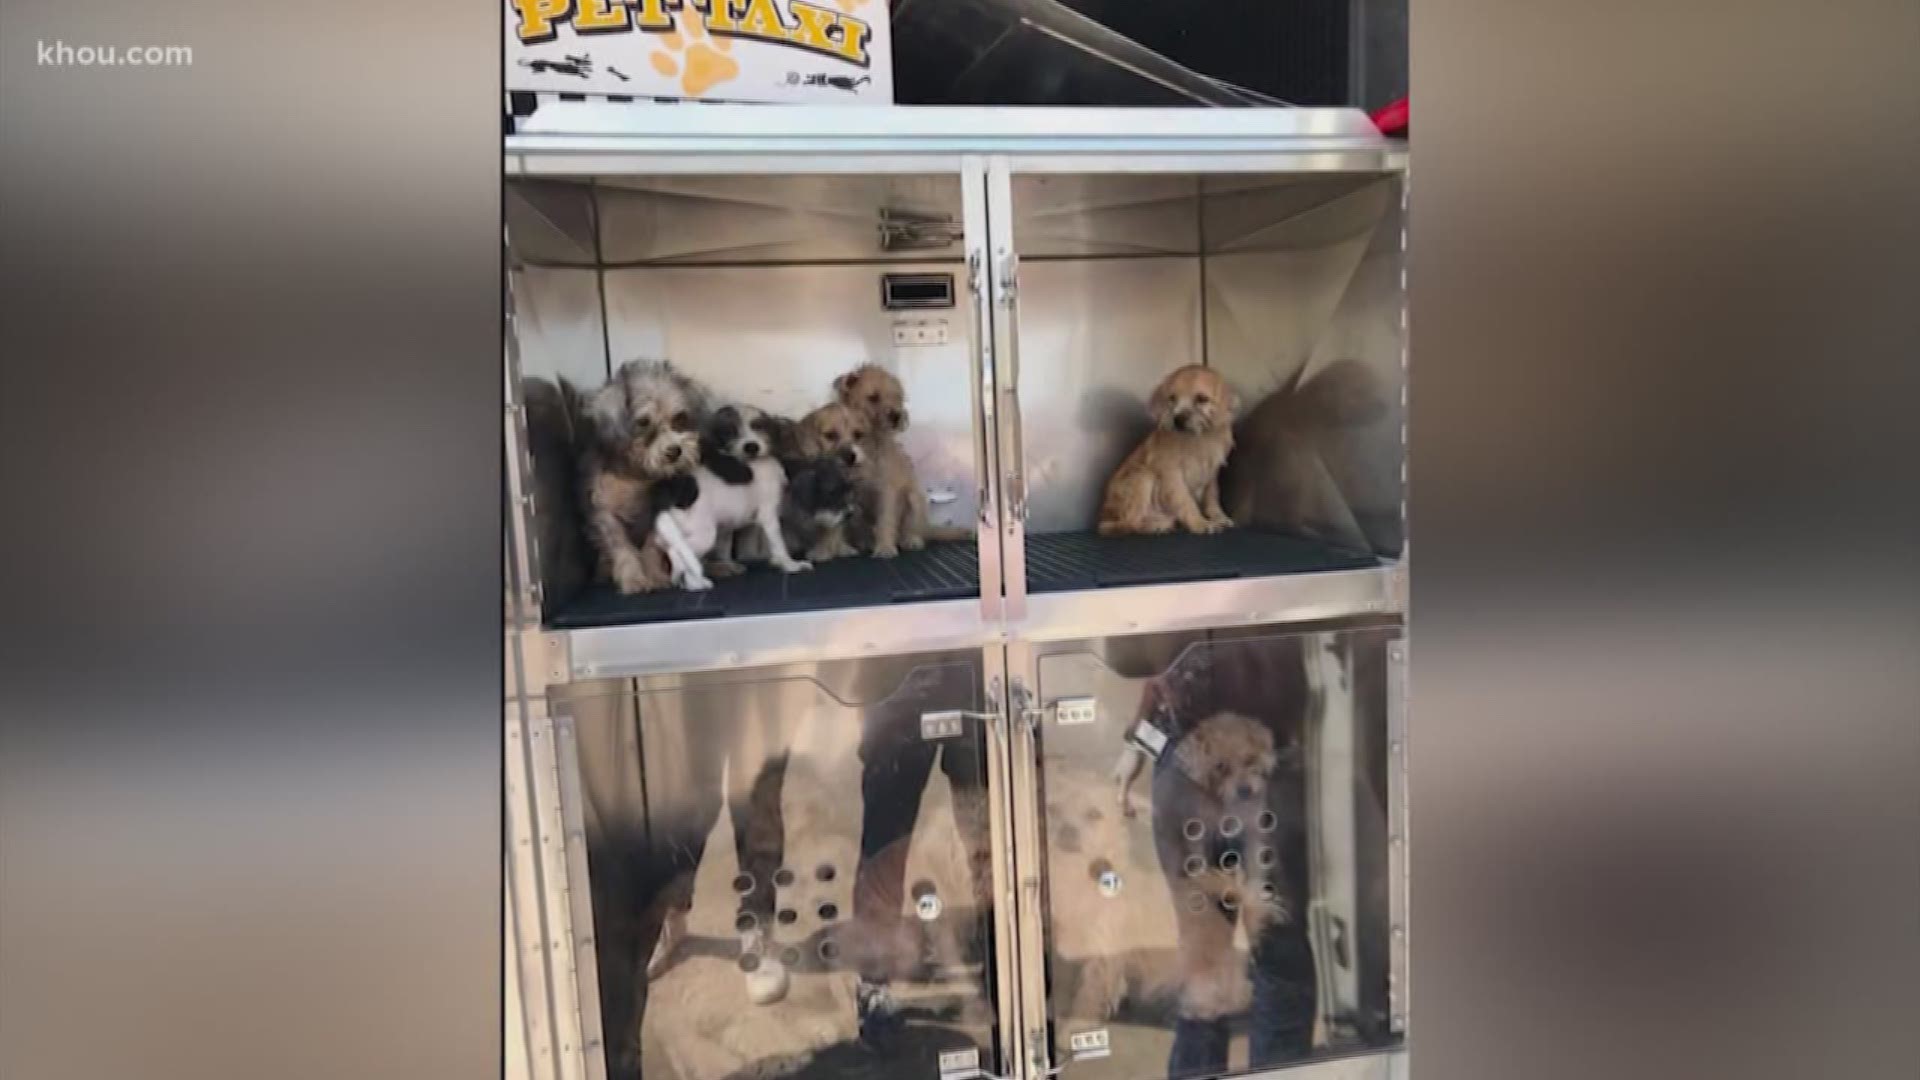 The Houston Humane Society is caring for 33 small dogs surrendered to the Harris County Animal Cruelty Taskforce from alleged case of hoarding.